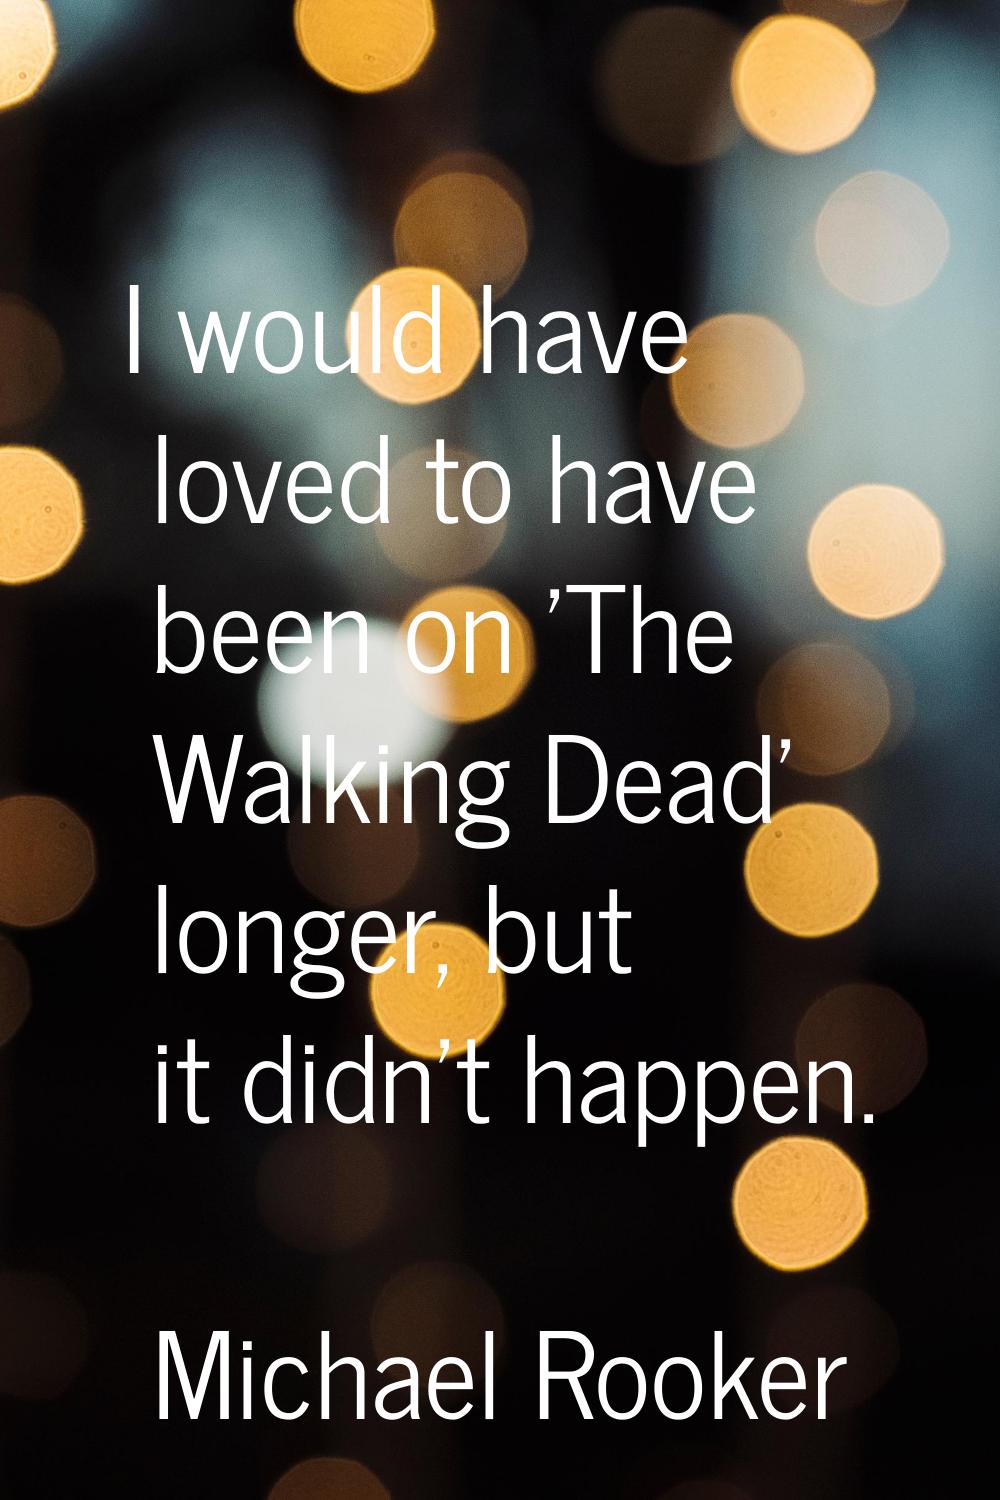 I would have loved to have been on 'The Walking Dead' longer, but it didn't happen.